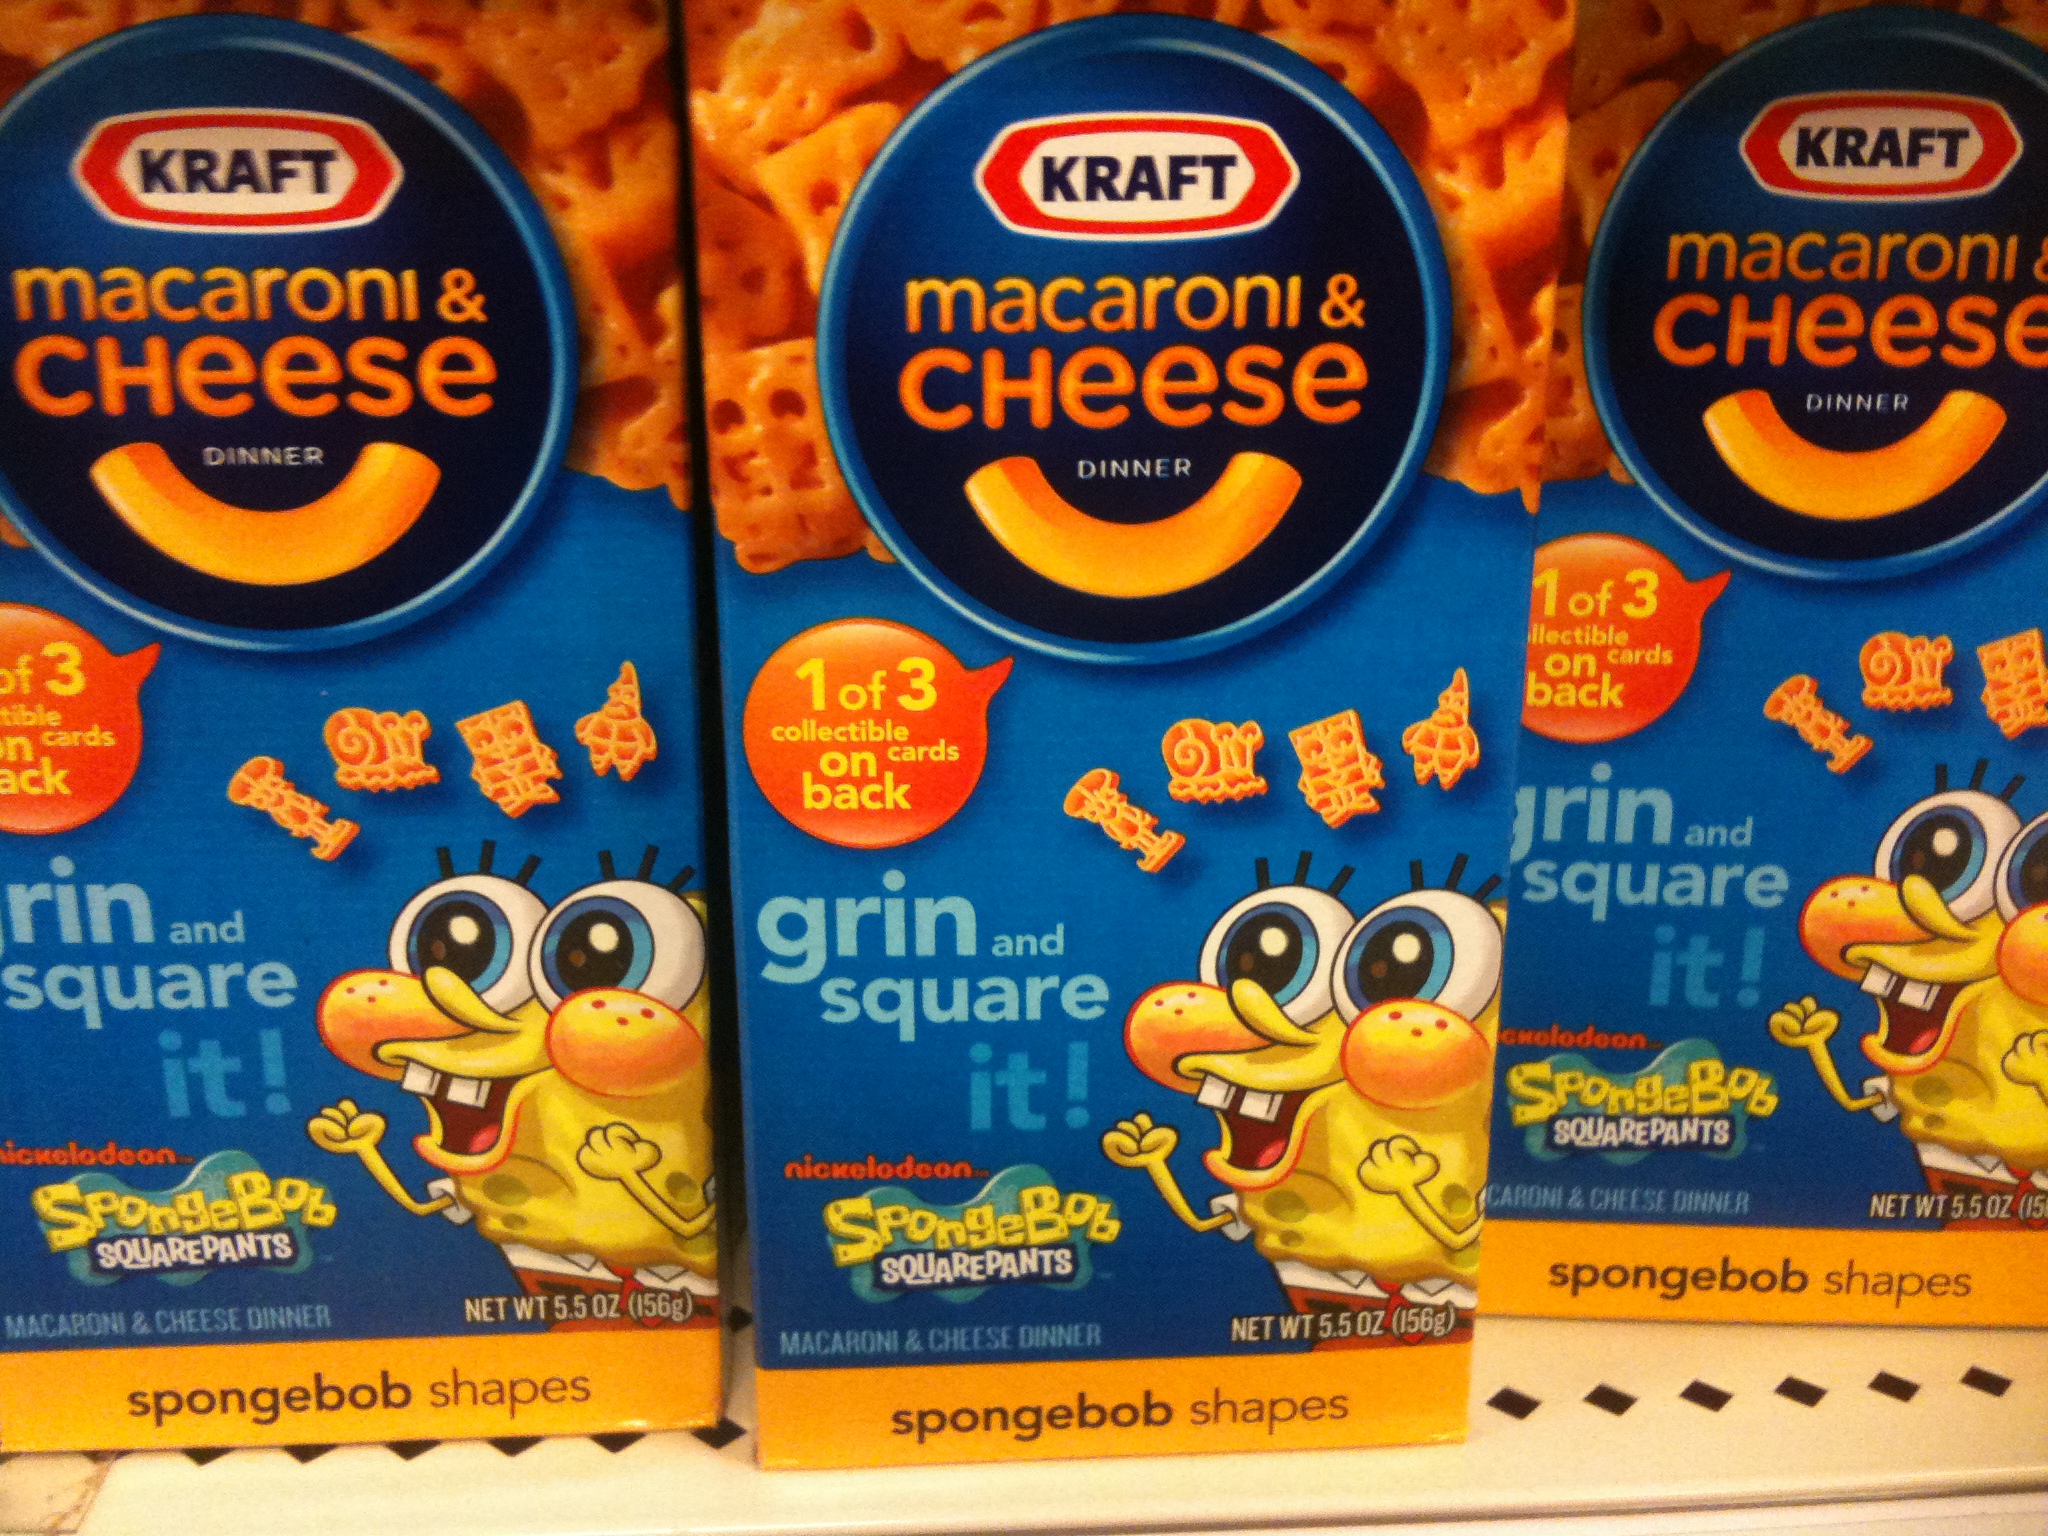 two packages of macaroni and cheese sitting in the store